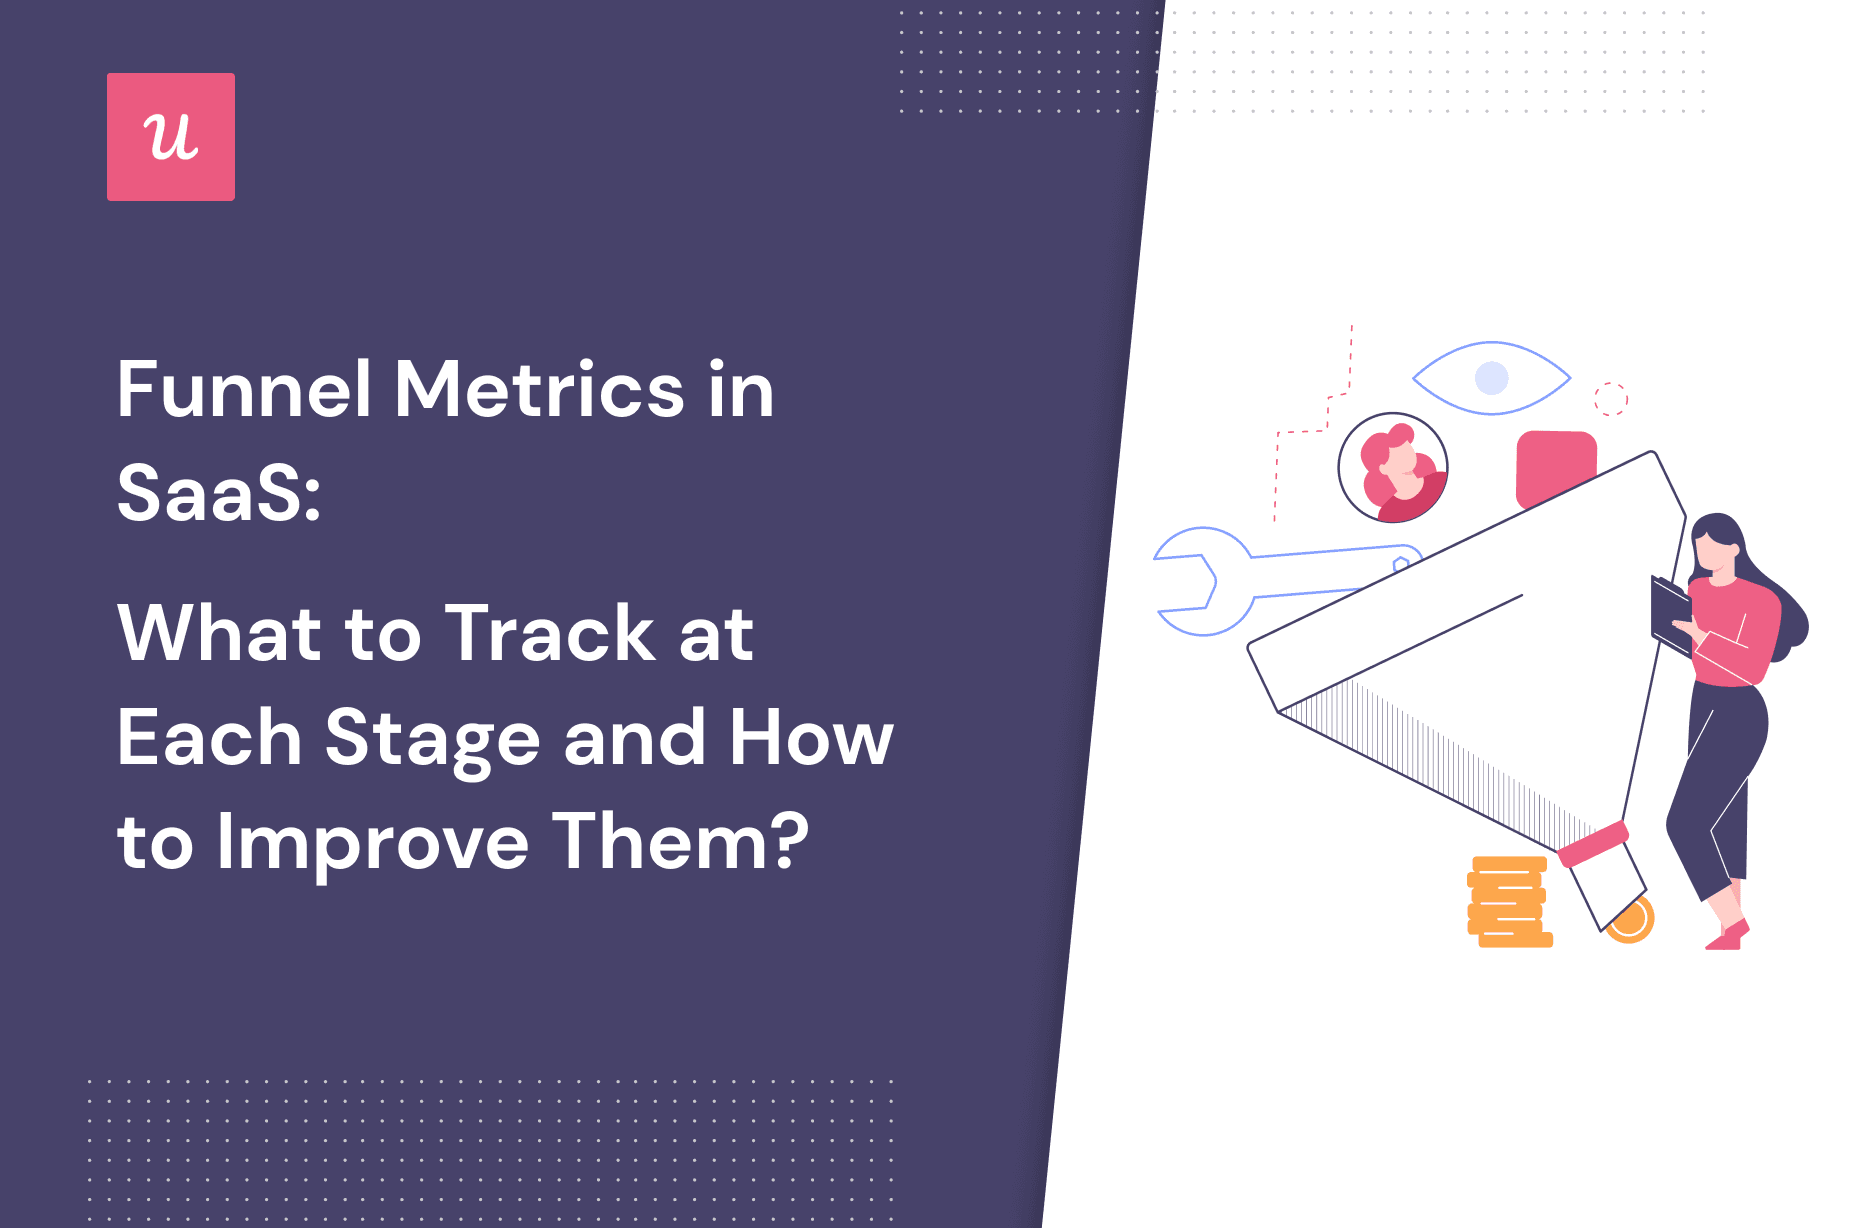 Funnel Metrics in SaaS: What To Track at Each Stage and How To Improve Them?